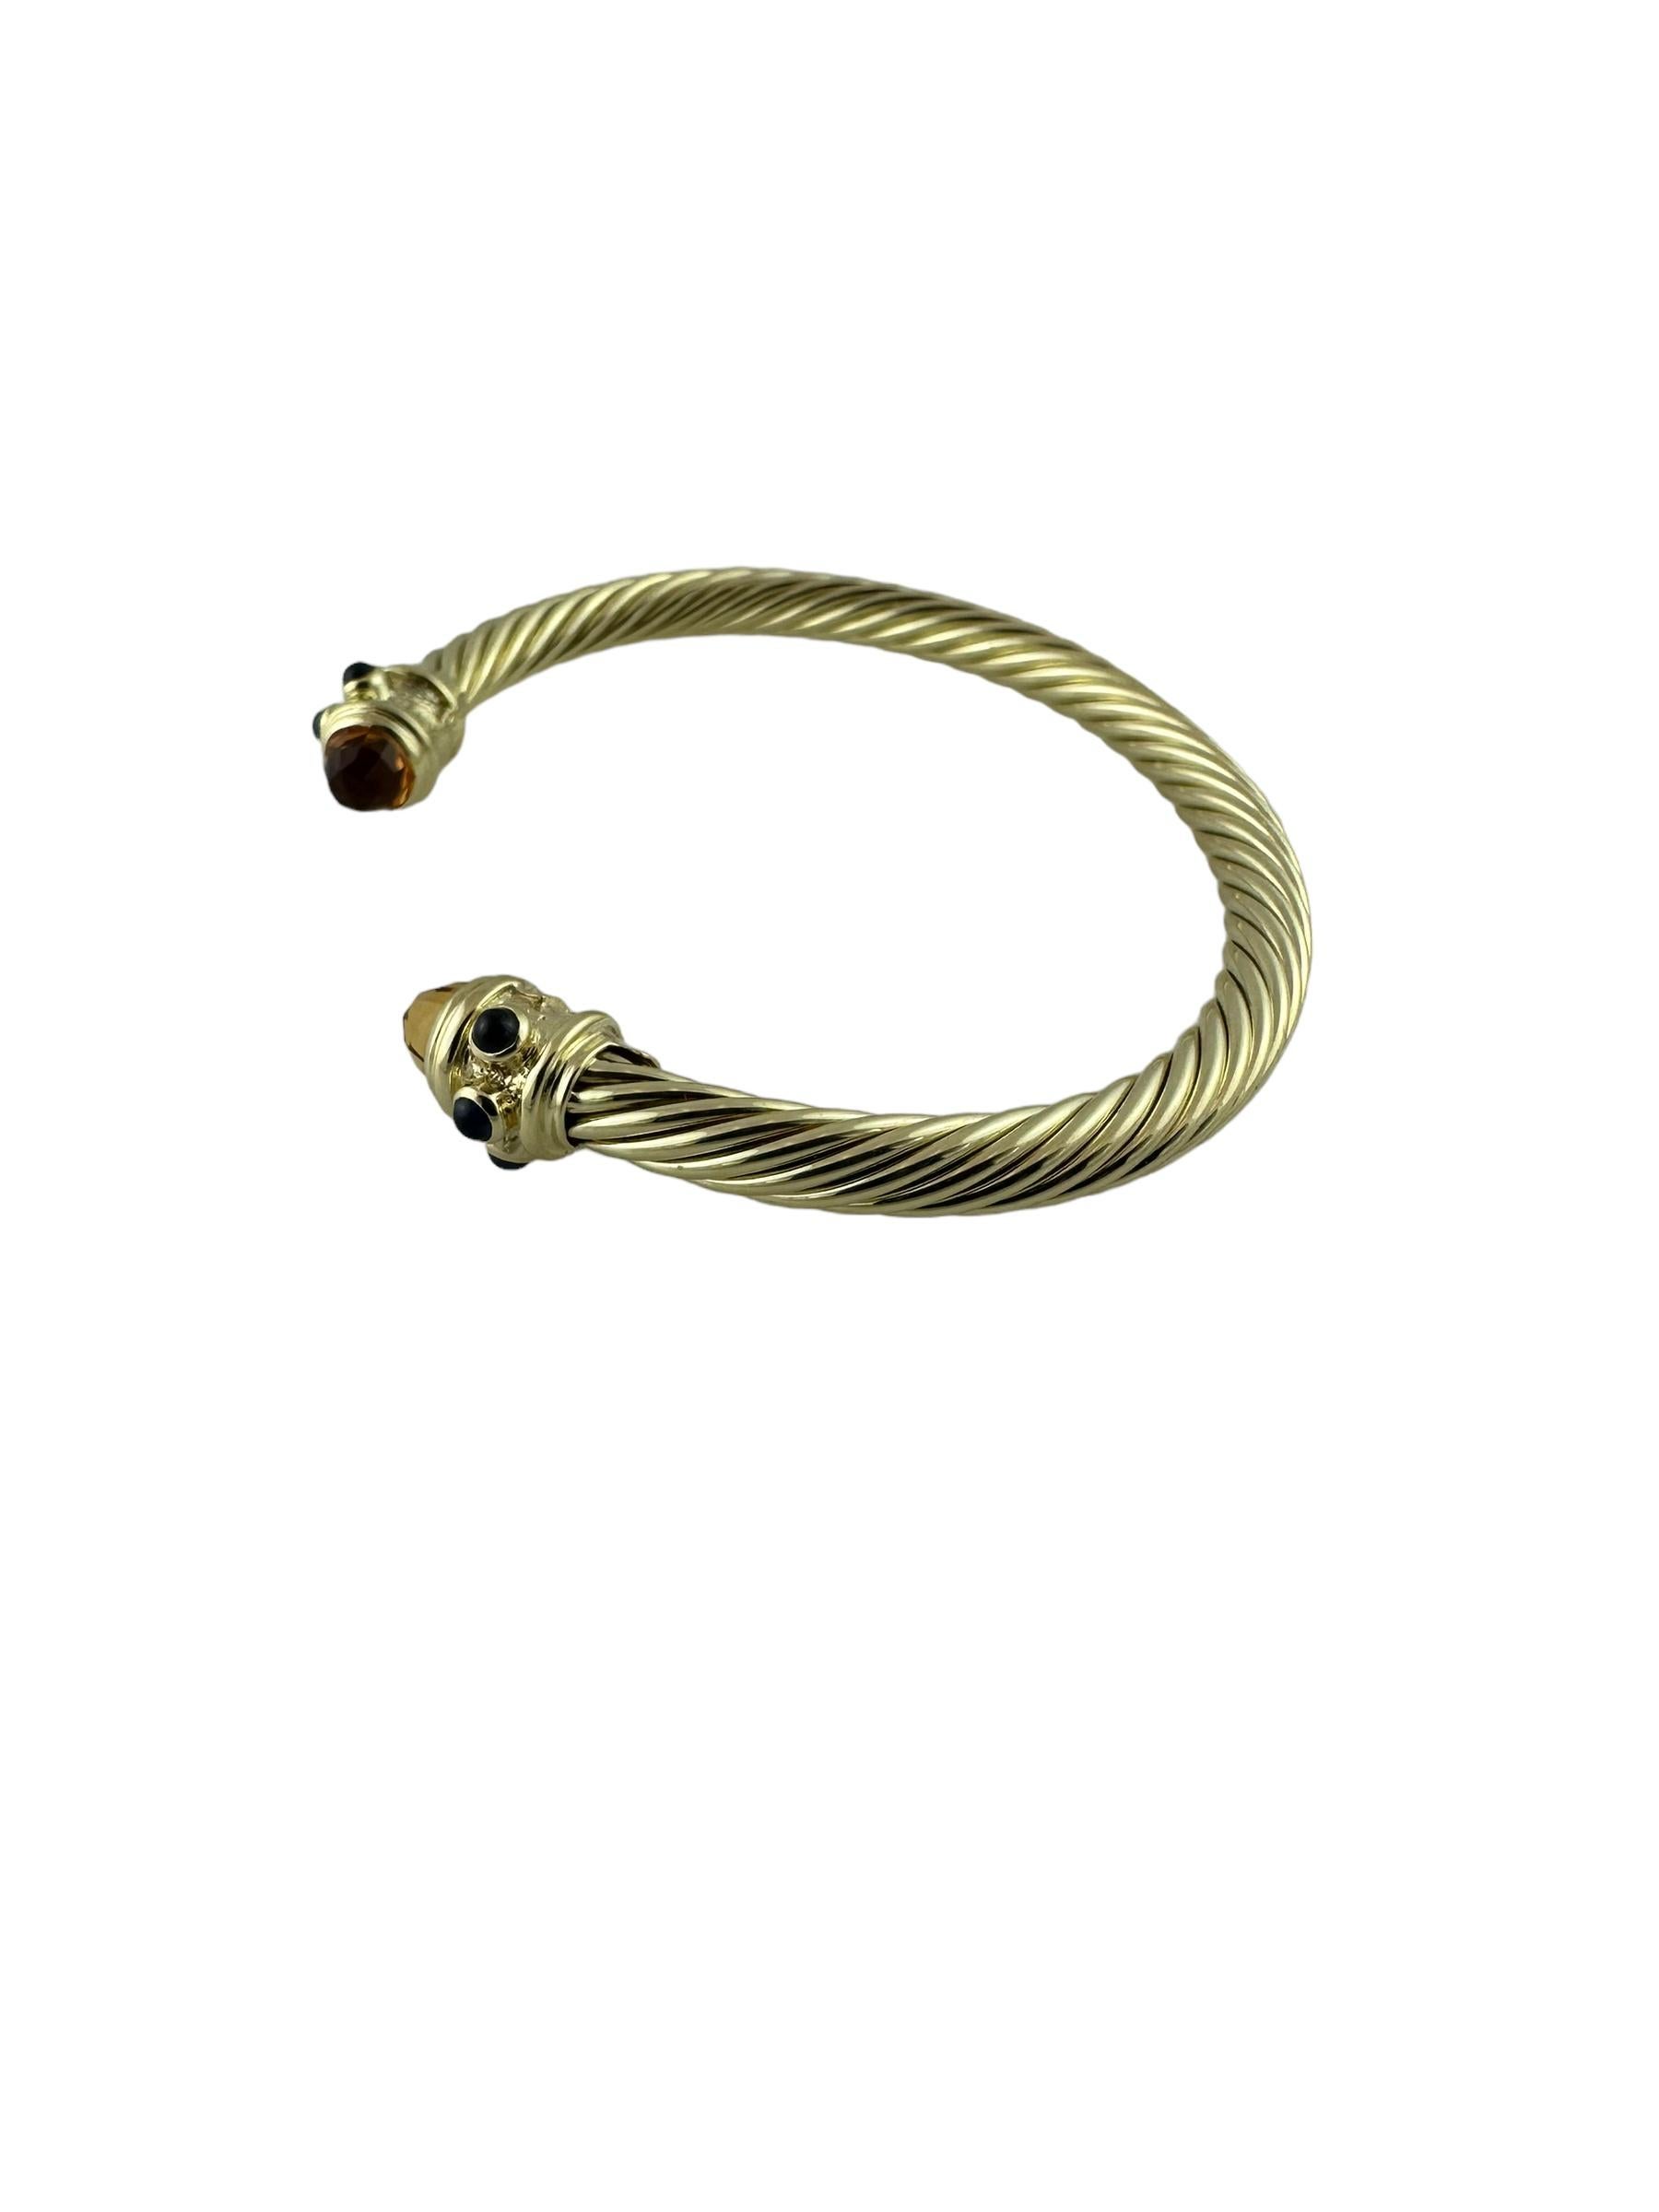 David Yurman Renaissance 14K Yellow Gold Citrine Sapphire Cable Cuff Bracelet

This beautiful cable cuff bracelet is from the David Yurman Renaissance collection and is set in 14K yellow gold

End caps are faceted citrine stones. Three cabochon blue